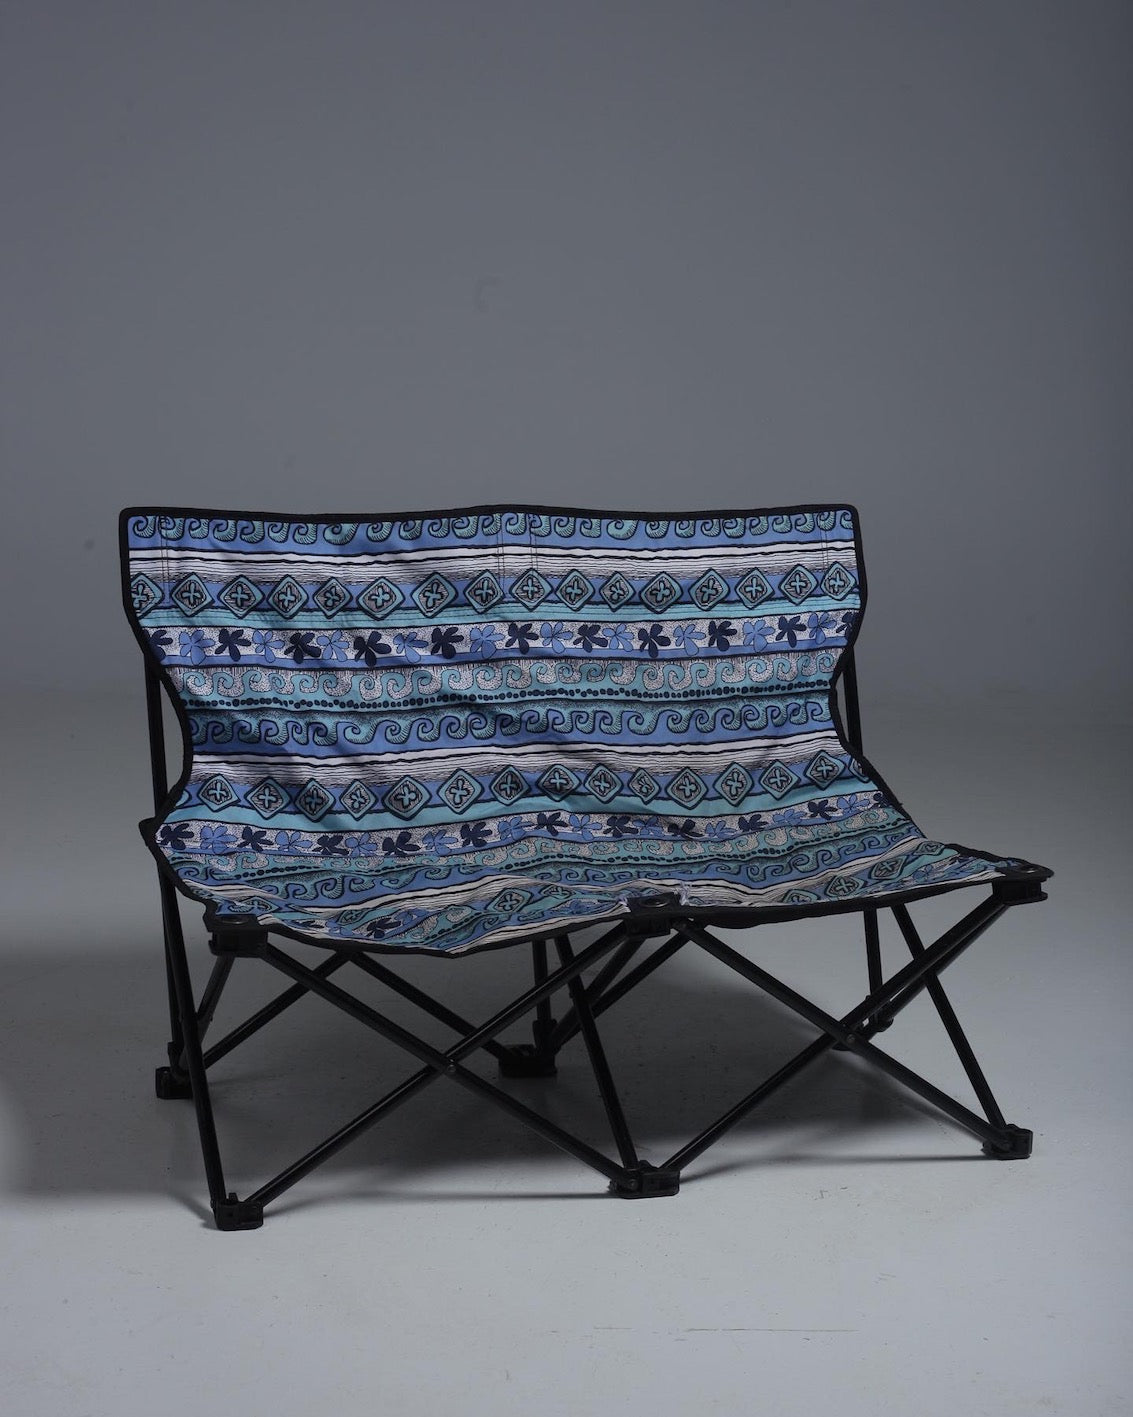 Stussy x Coleman Two Seater Chair 2015